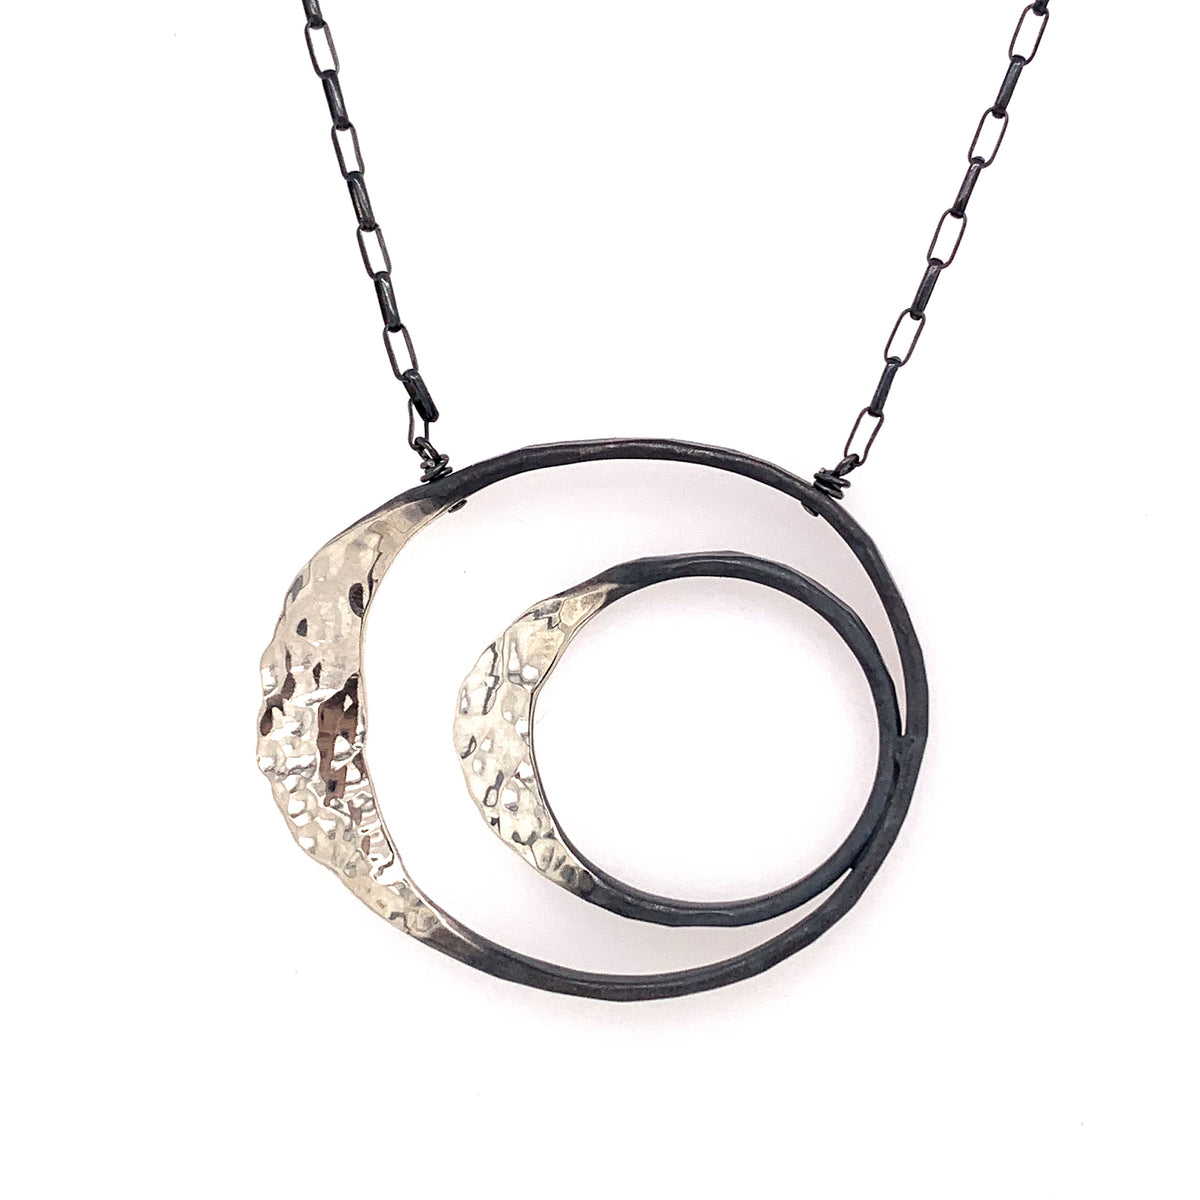 Small Double Satin Shiny Eclipse Necklace (N1859) - DanaReedDesigns